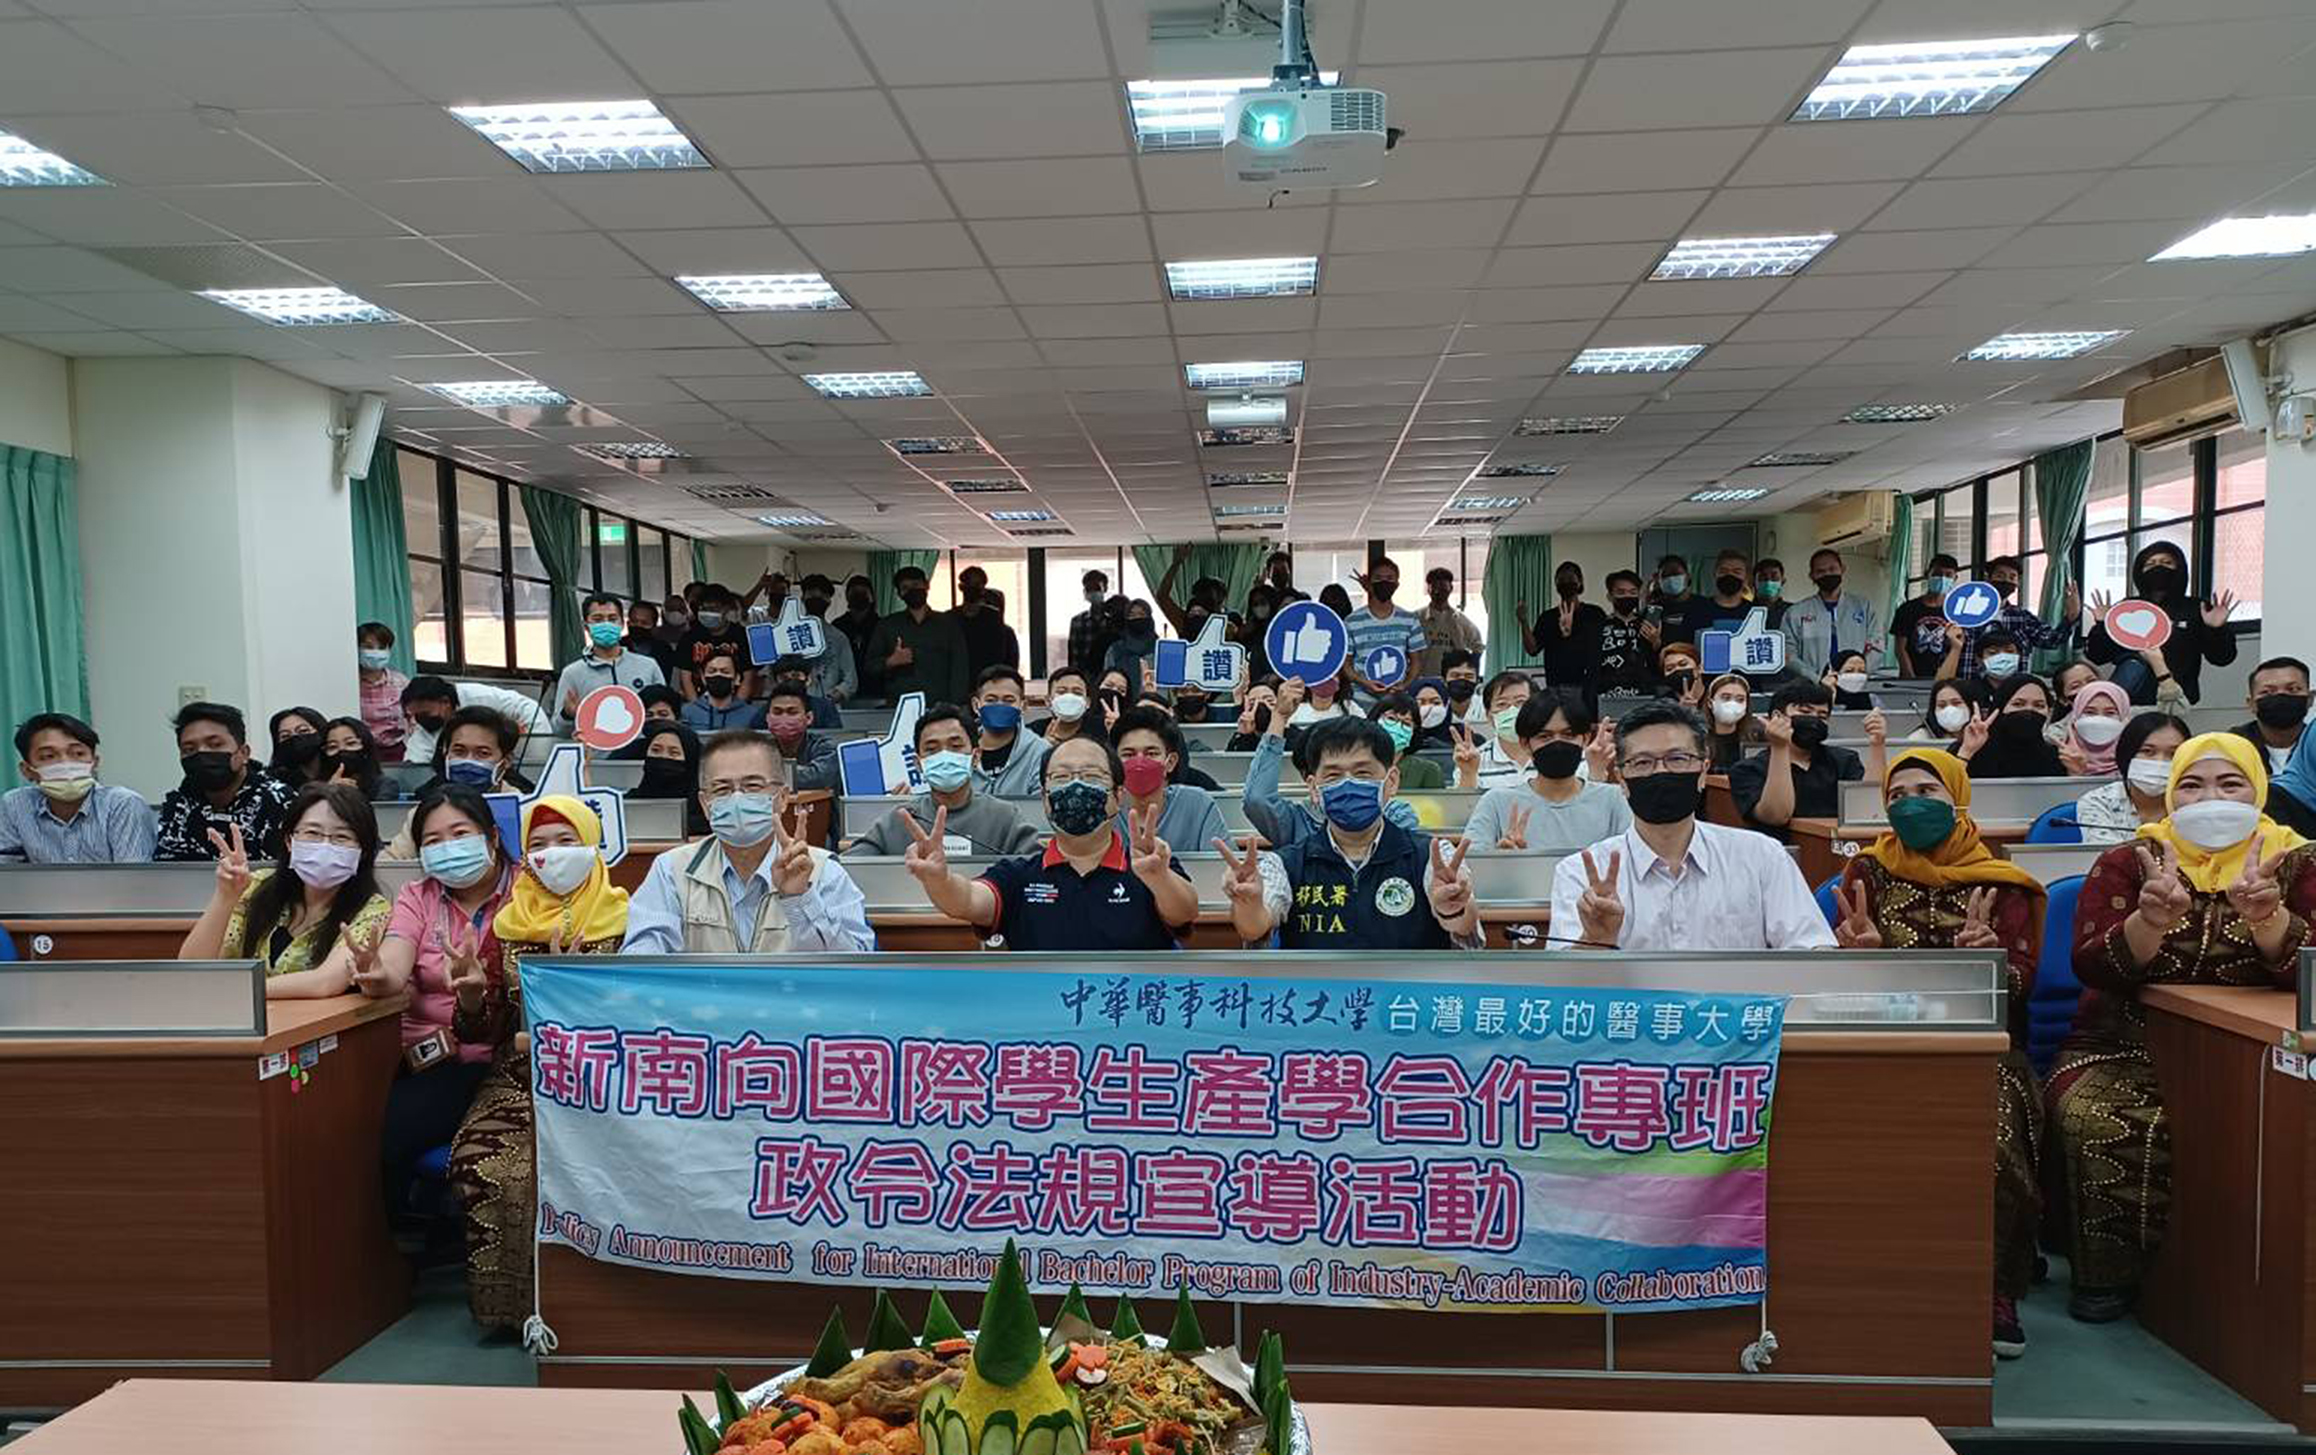 National Immigration Agency Disseminate Instructions of Staying in Taiwan for Jobs to Foreign Students with Labor Affairs Bureau  Photo provided by Chung Hwa Medical University